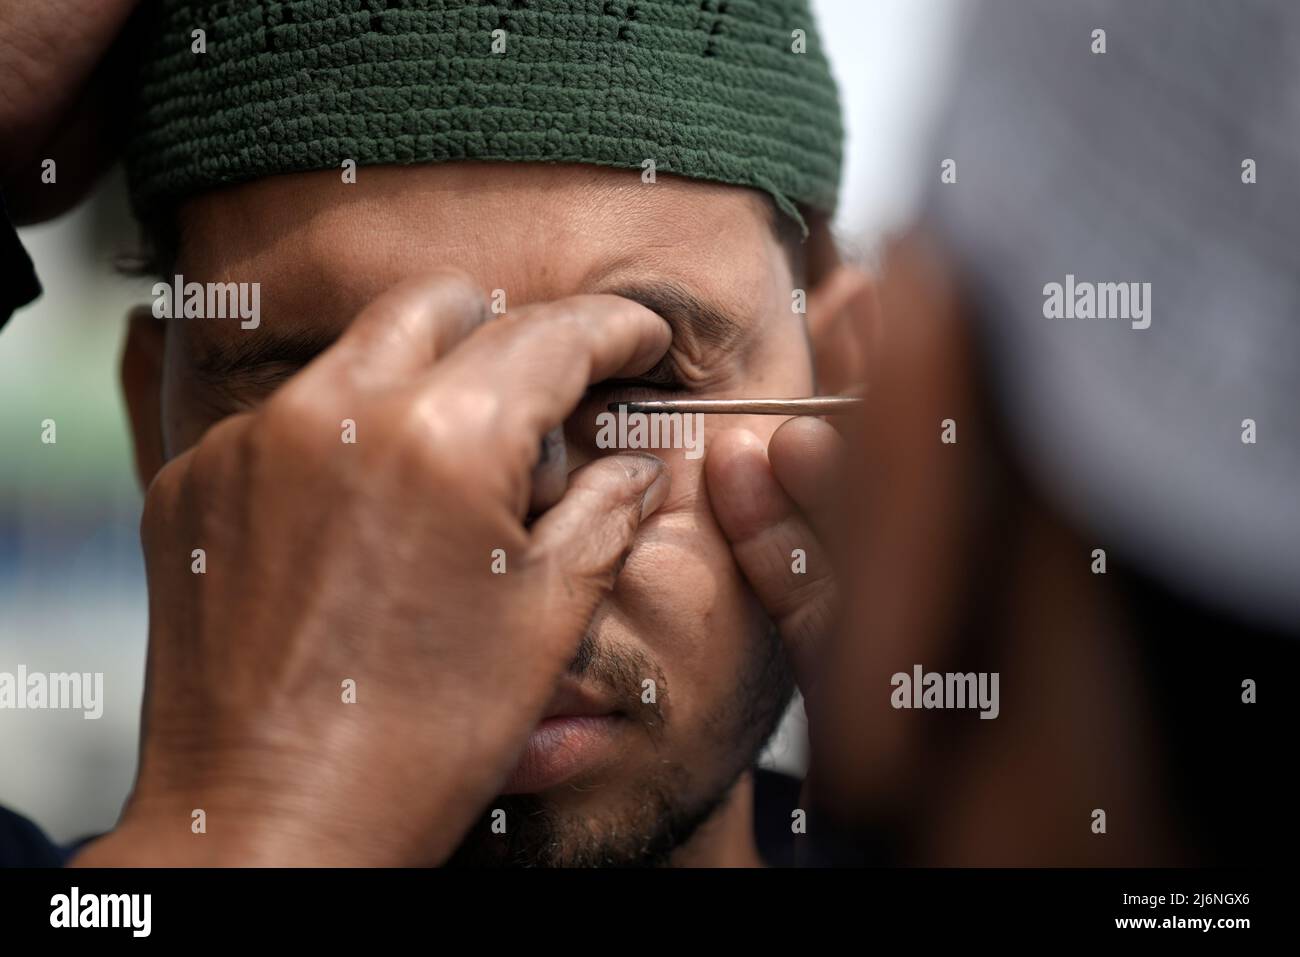 Guwahati, Assam, India. 03rd May, 2022. A Muslim man applying Surma on eyes before offer prayer at a Eidgah to start the Eid al-Fitr festival, which marks the end of their holy fasting month of Ramadan, in Guwahati, Assam, India on May 03, 2022. Credit: David Talukdar/Alamy Live News Stock Photo